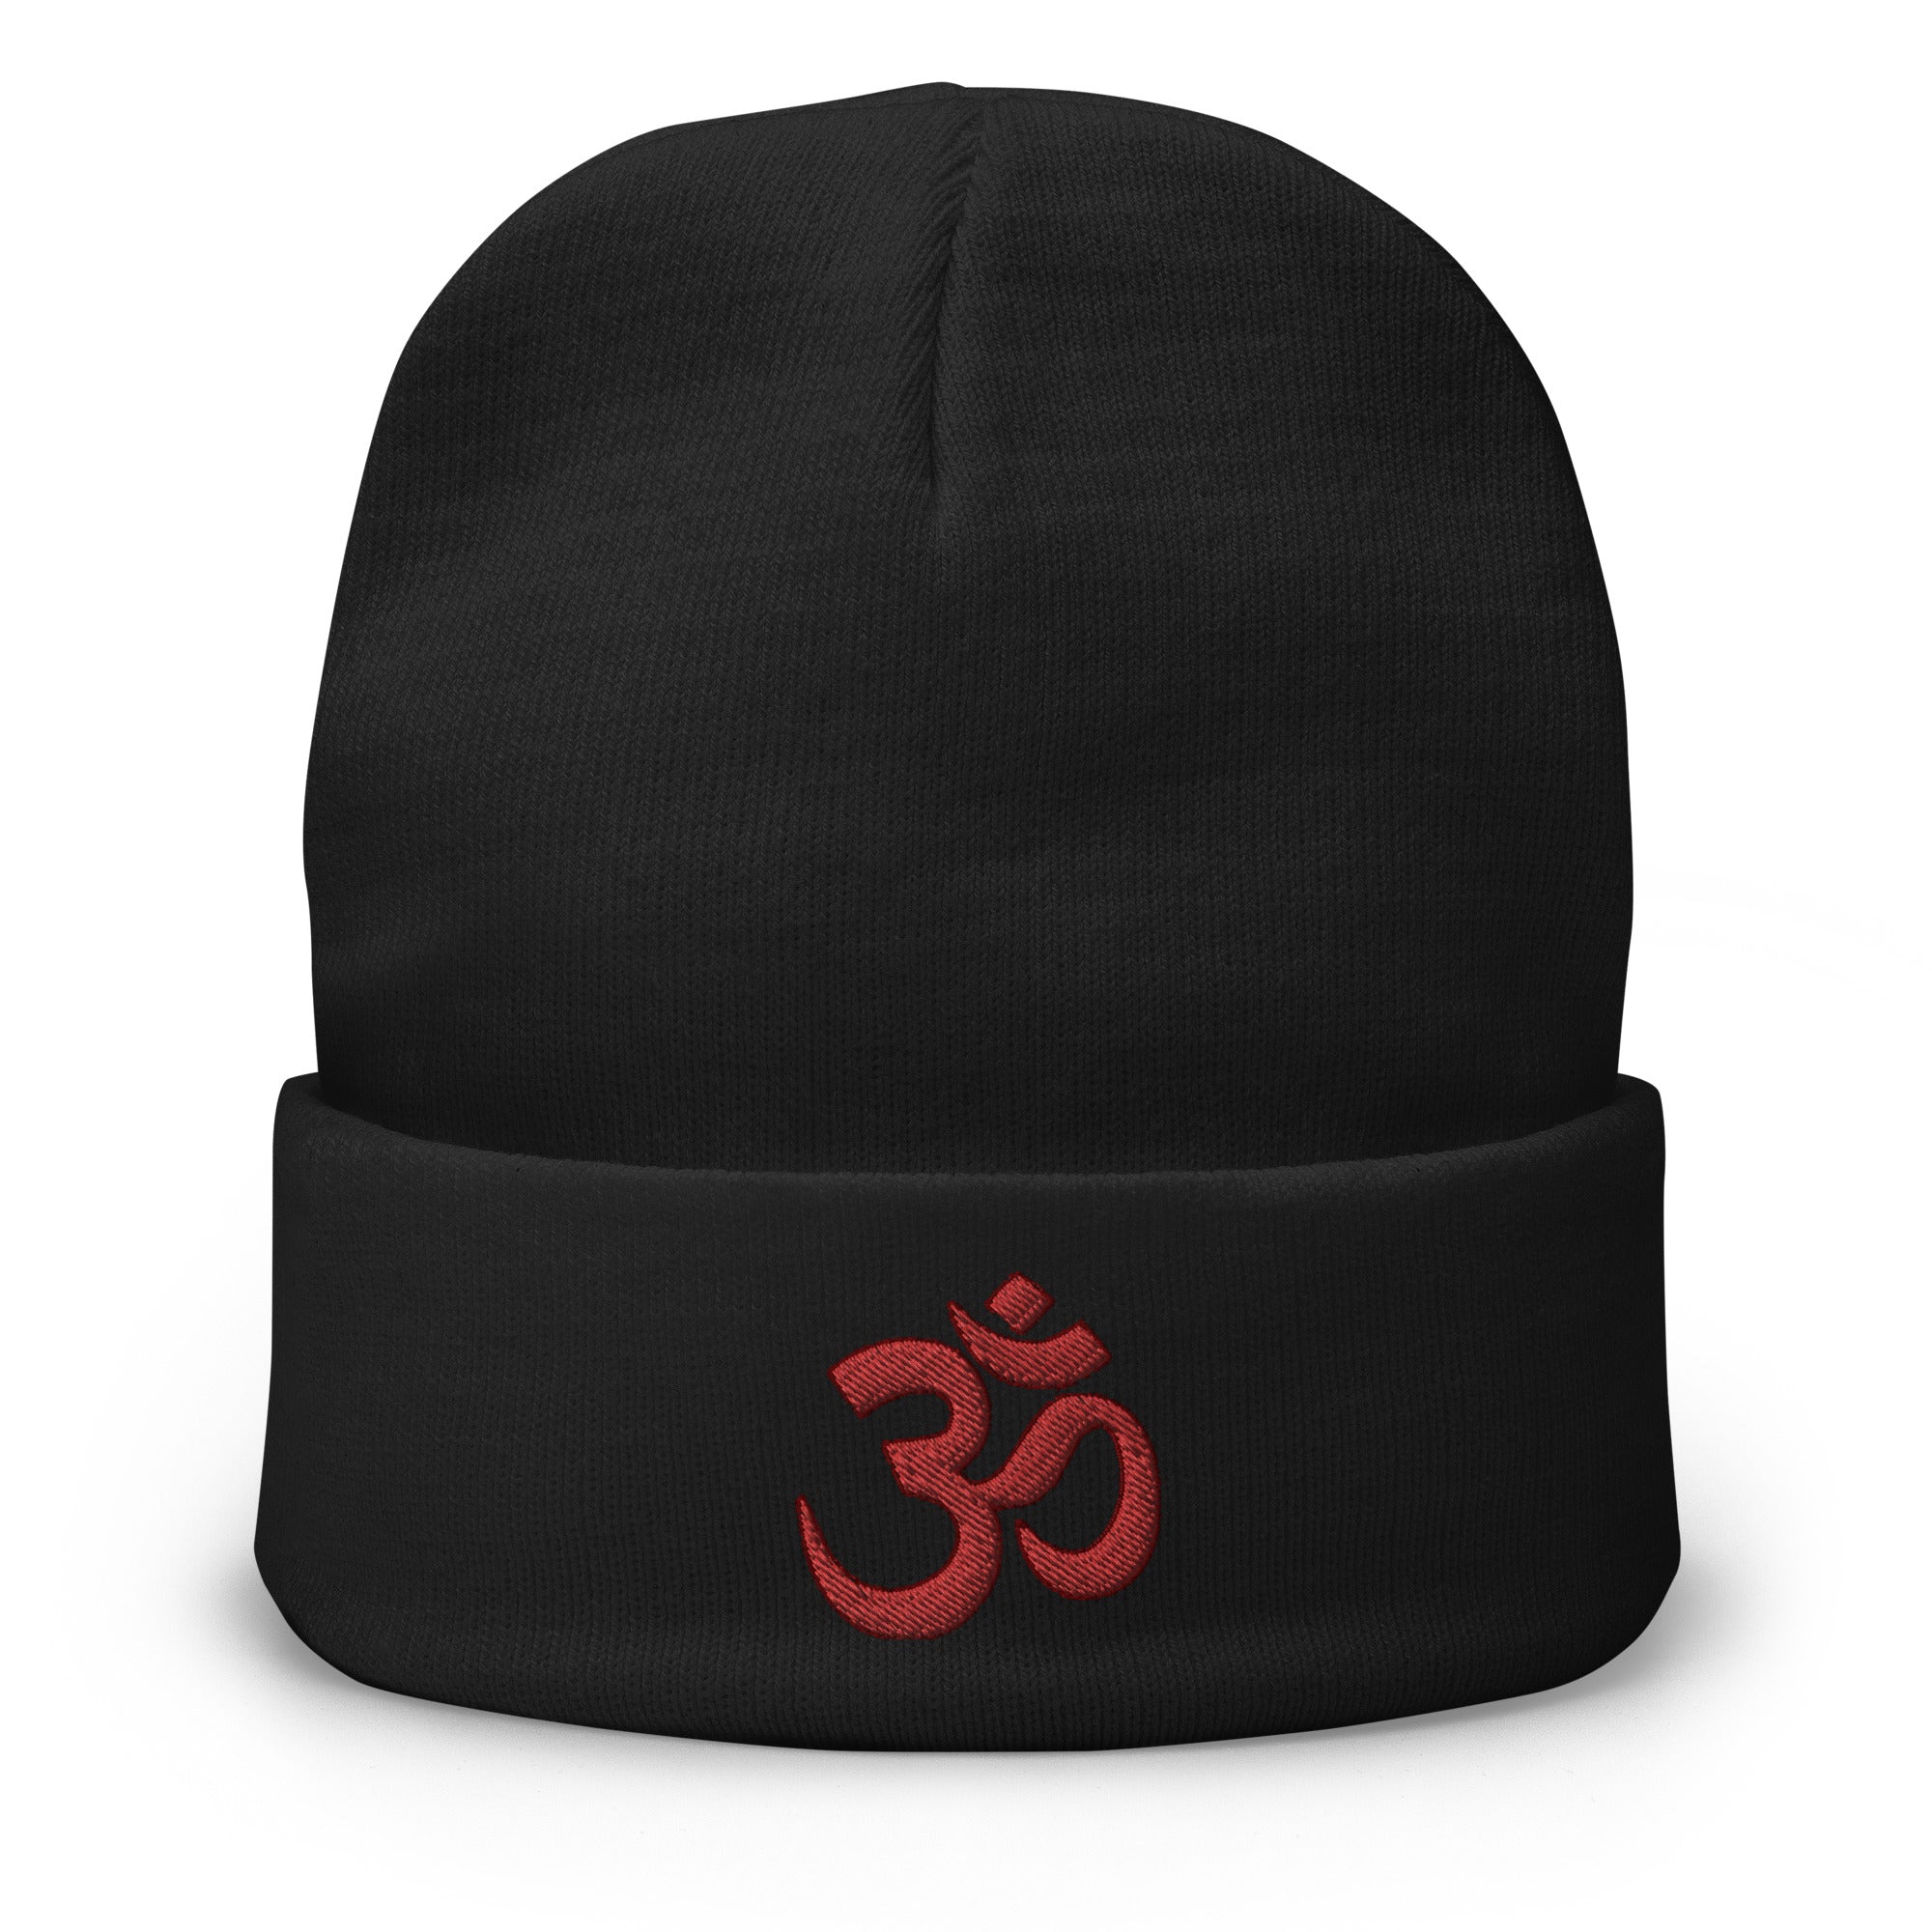 OM Sacred Spiritual Symbol Embroidered Cuff Beanie Vibration of the Universe - Edge of Life Designs